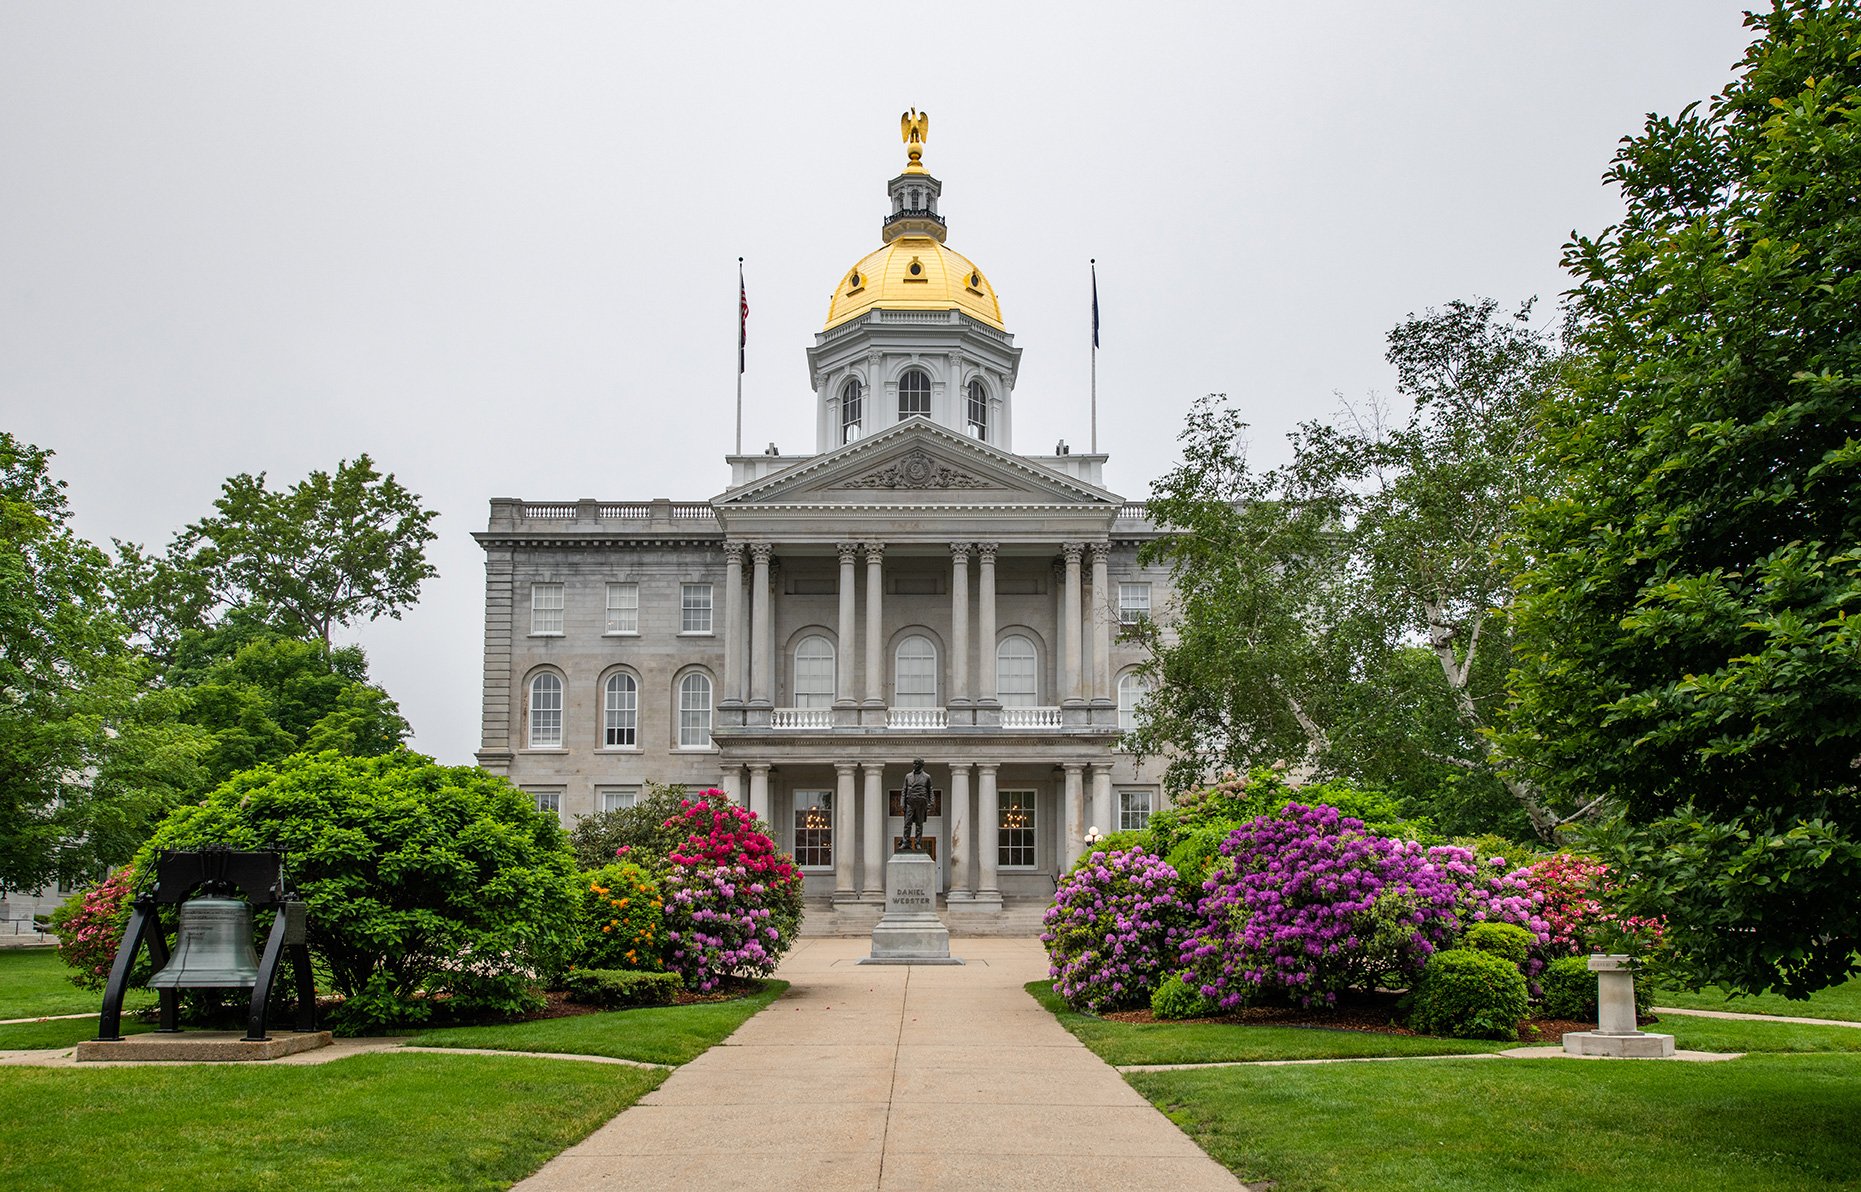 The New Hampshire state capitol building in Concord, New Hampshire.